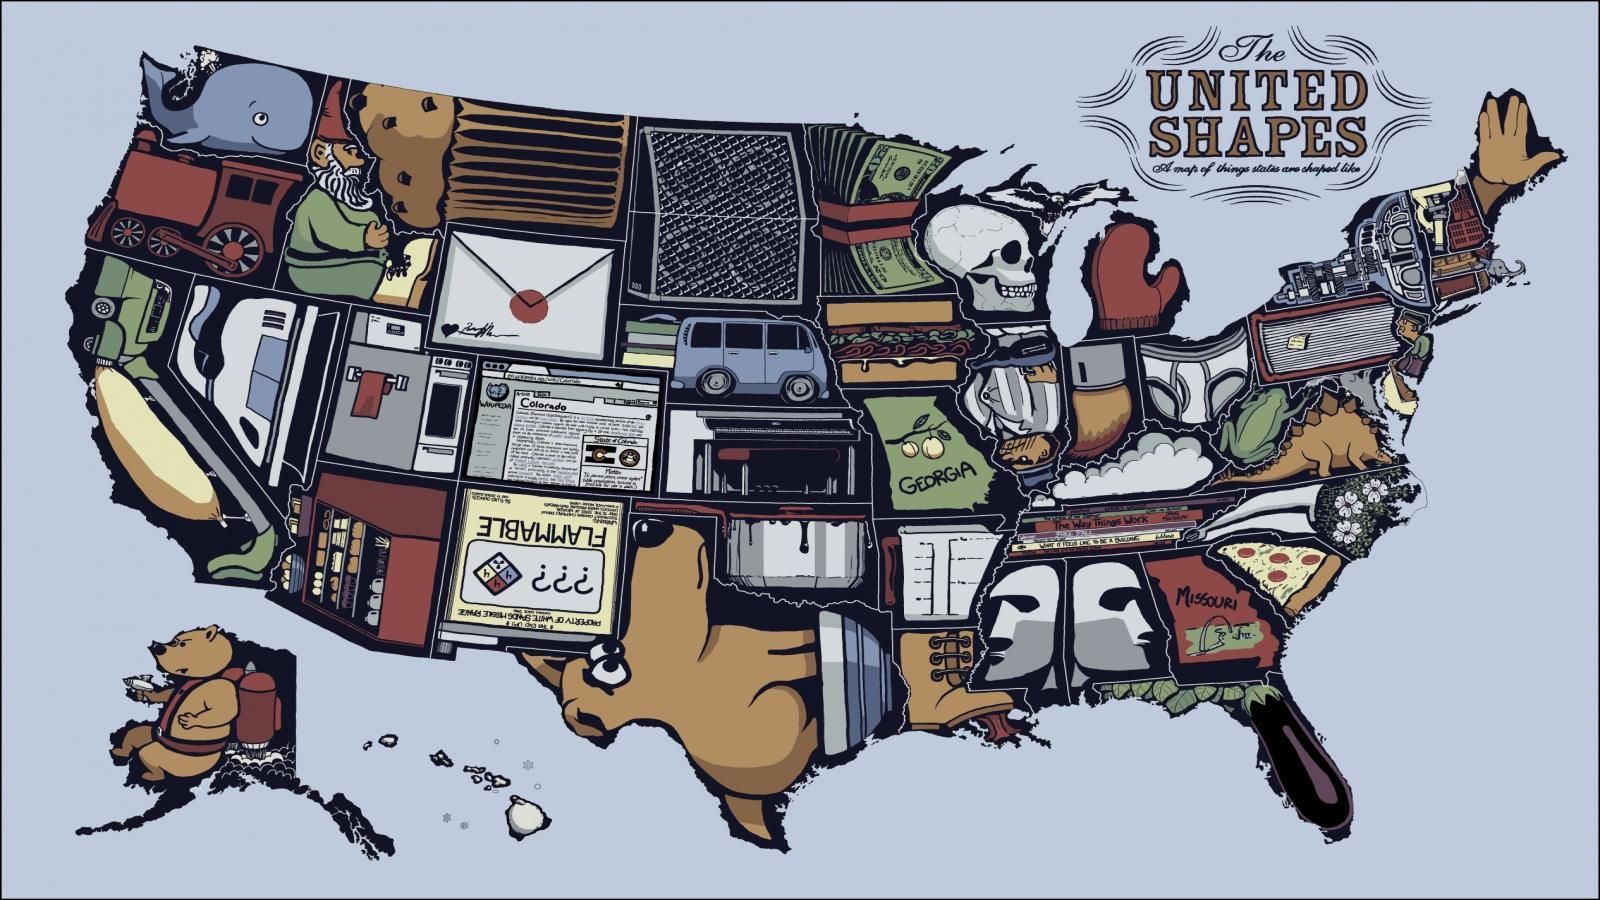 HD USA Map Wallpaper. United states map, Shape posters, The unit